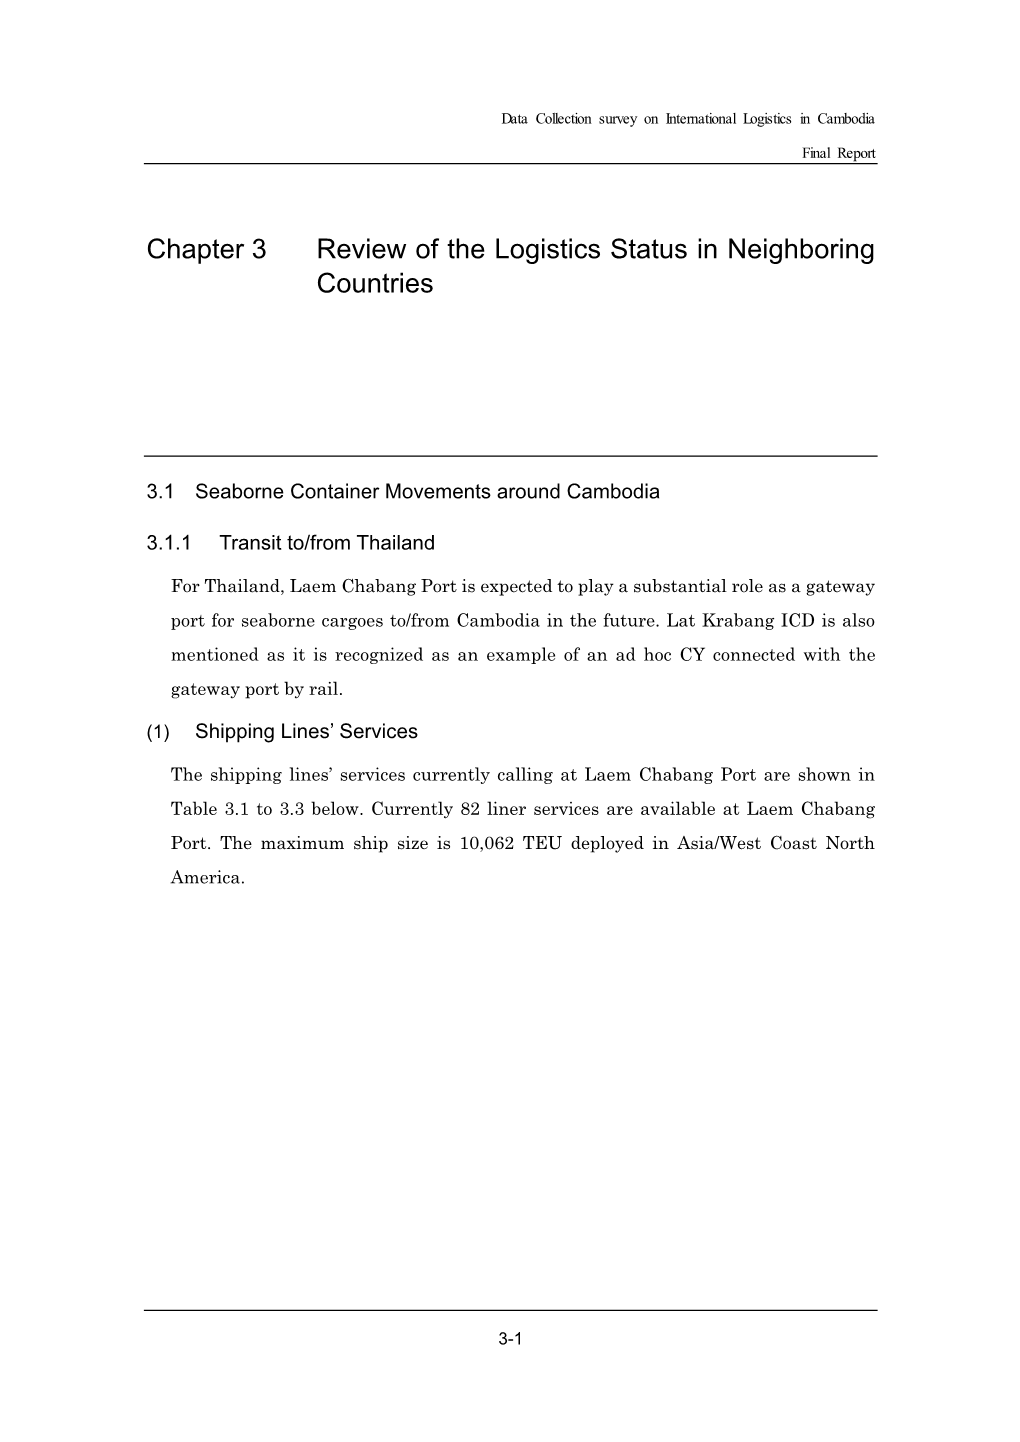 Chapter 3 Review of the Logistics Status in Neighboring Countries